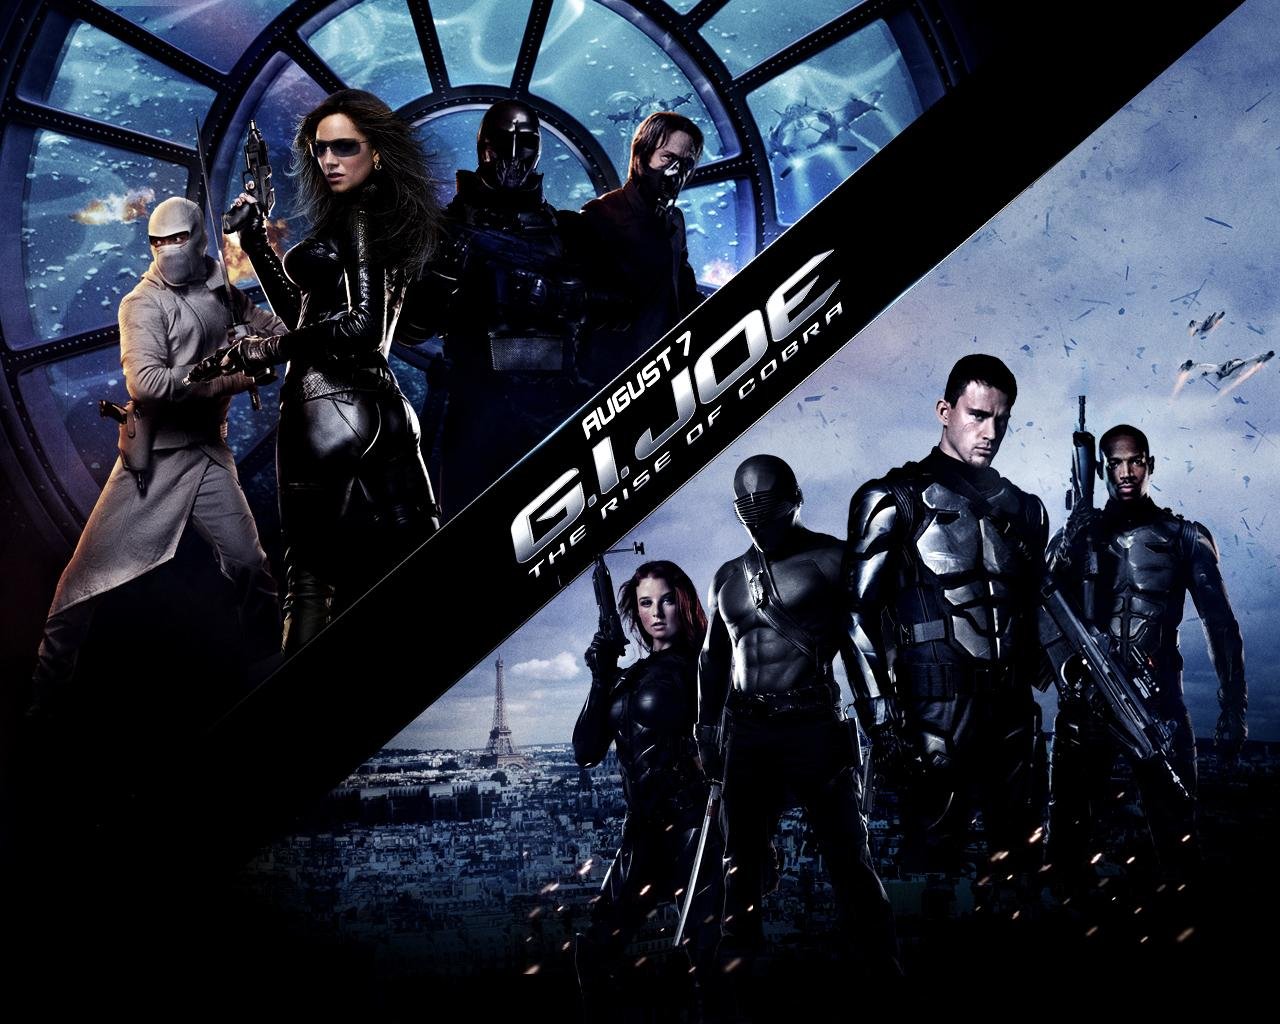 GI Joe The Rise of Cobra Trailers and Wallpapers   Movies 1280x1024